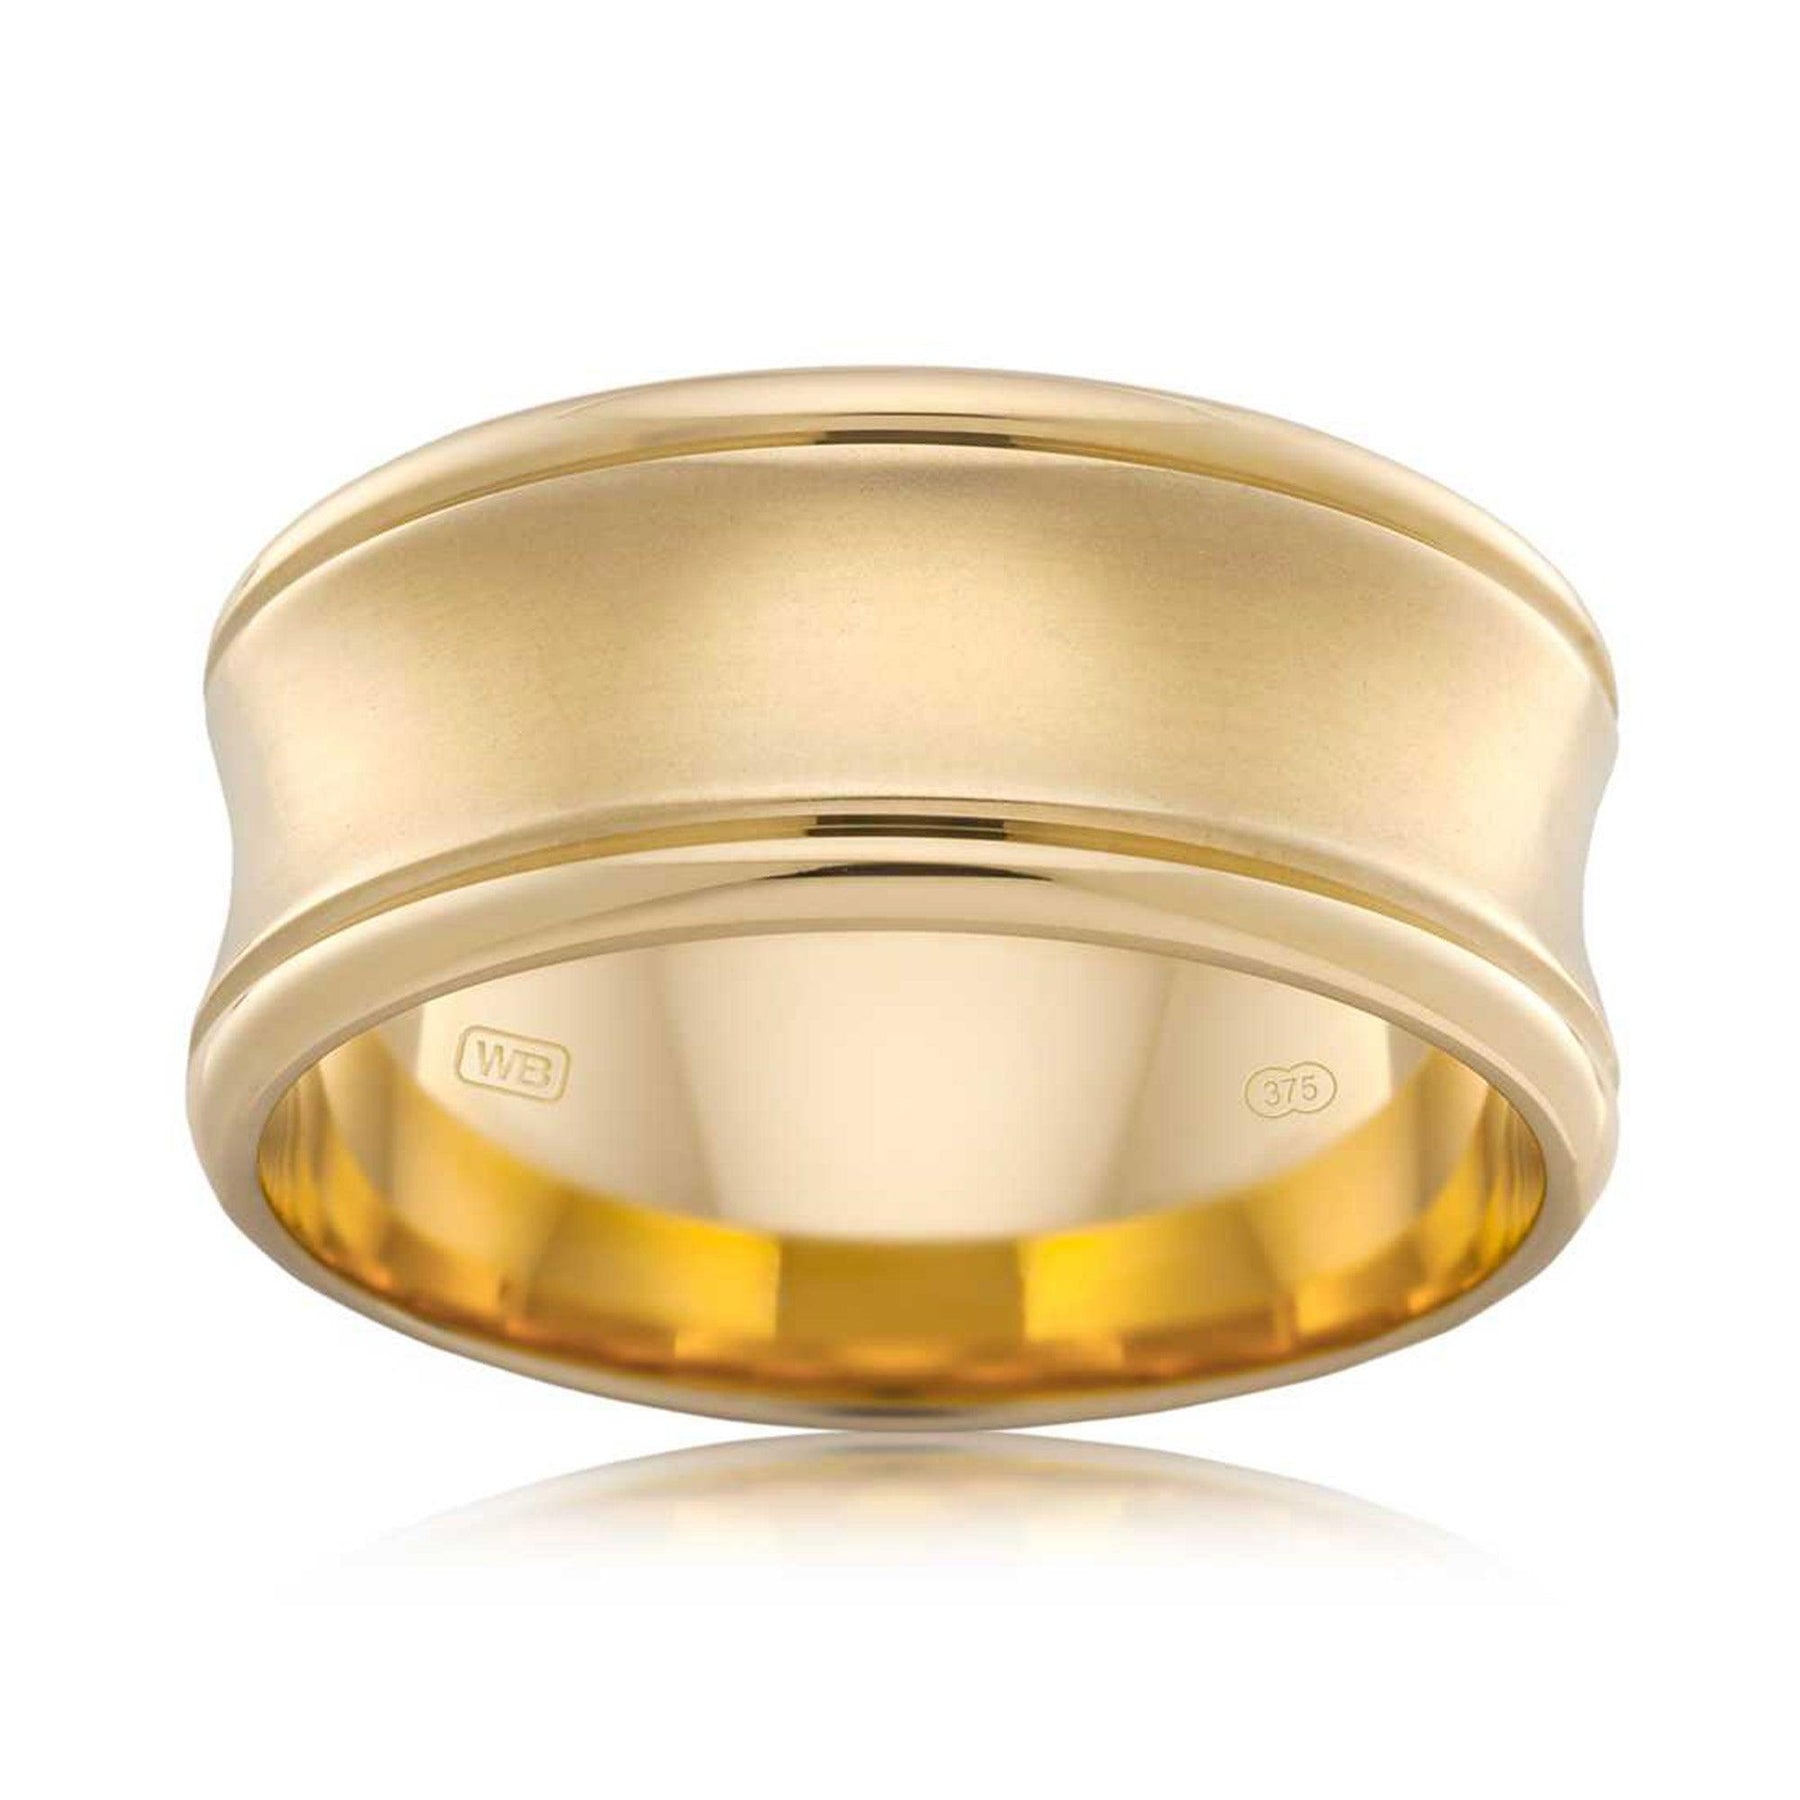 Men's Wedding Band in 9ct Yellow Gold